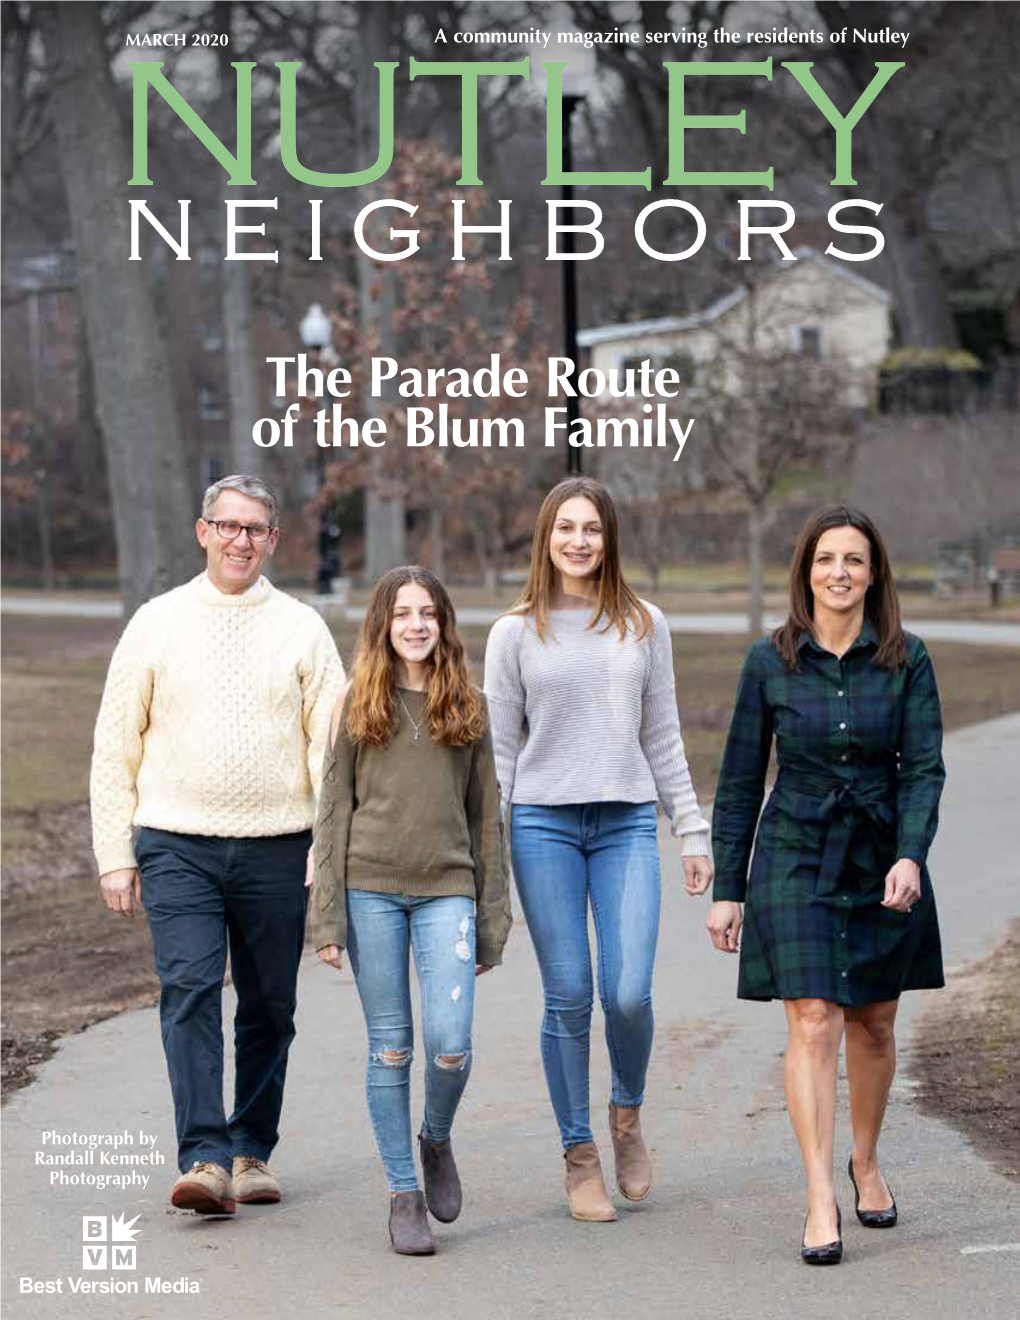 MARCH 2020 a Community Magazine Serving the Residents of Nutley NUTLEY NEIGHBORS